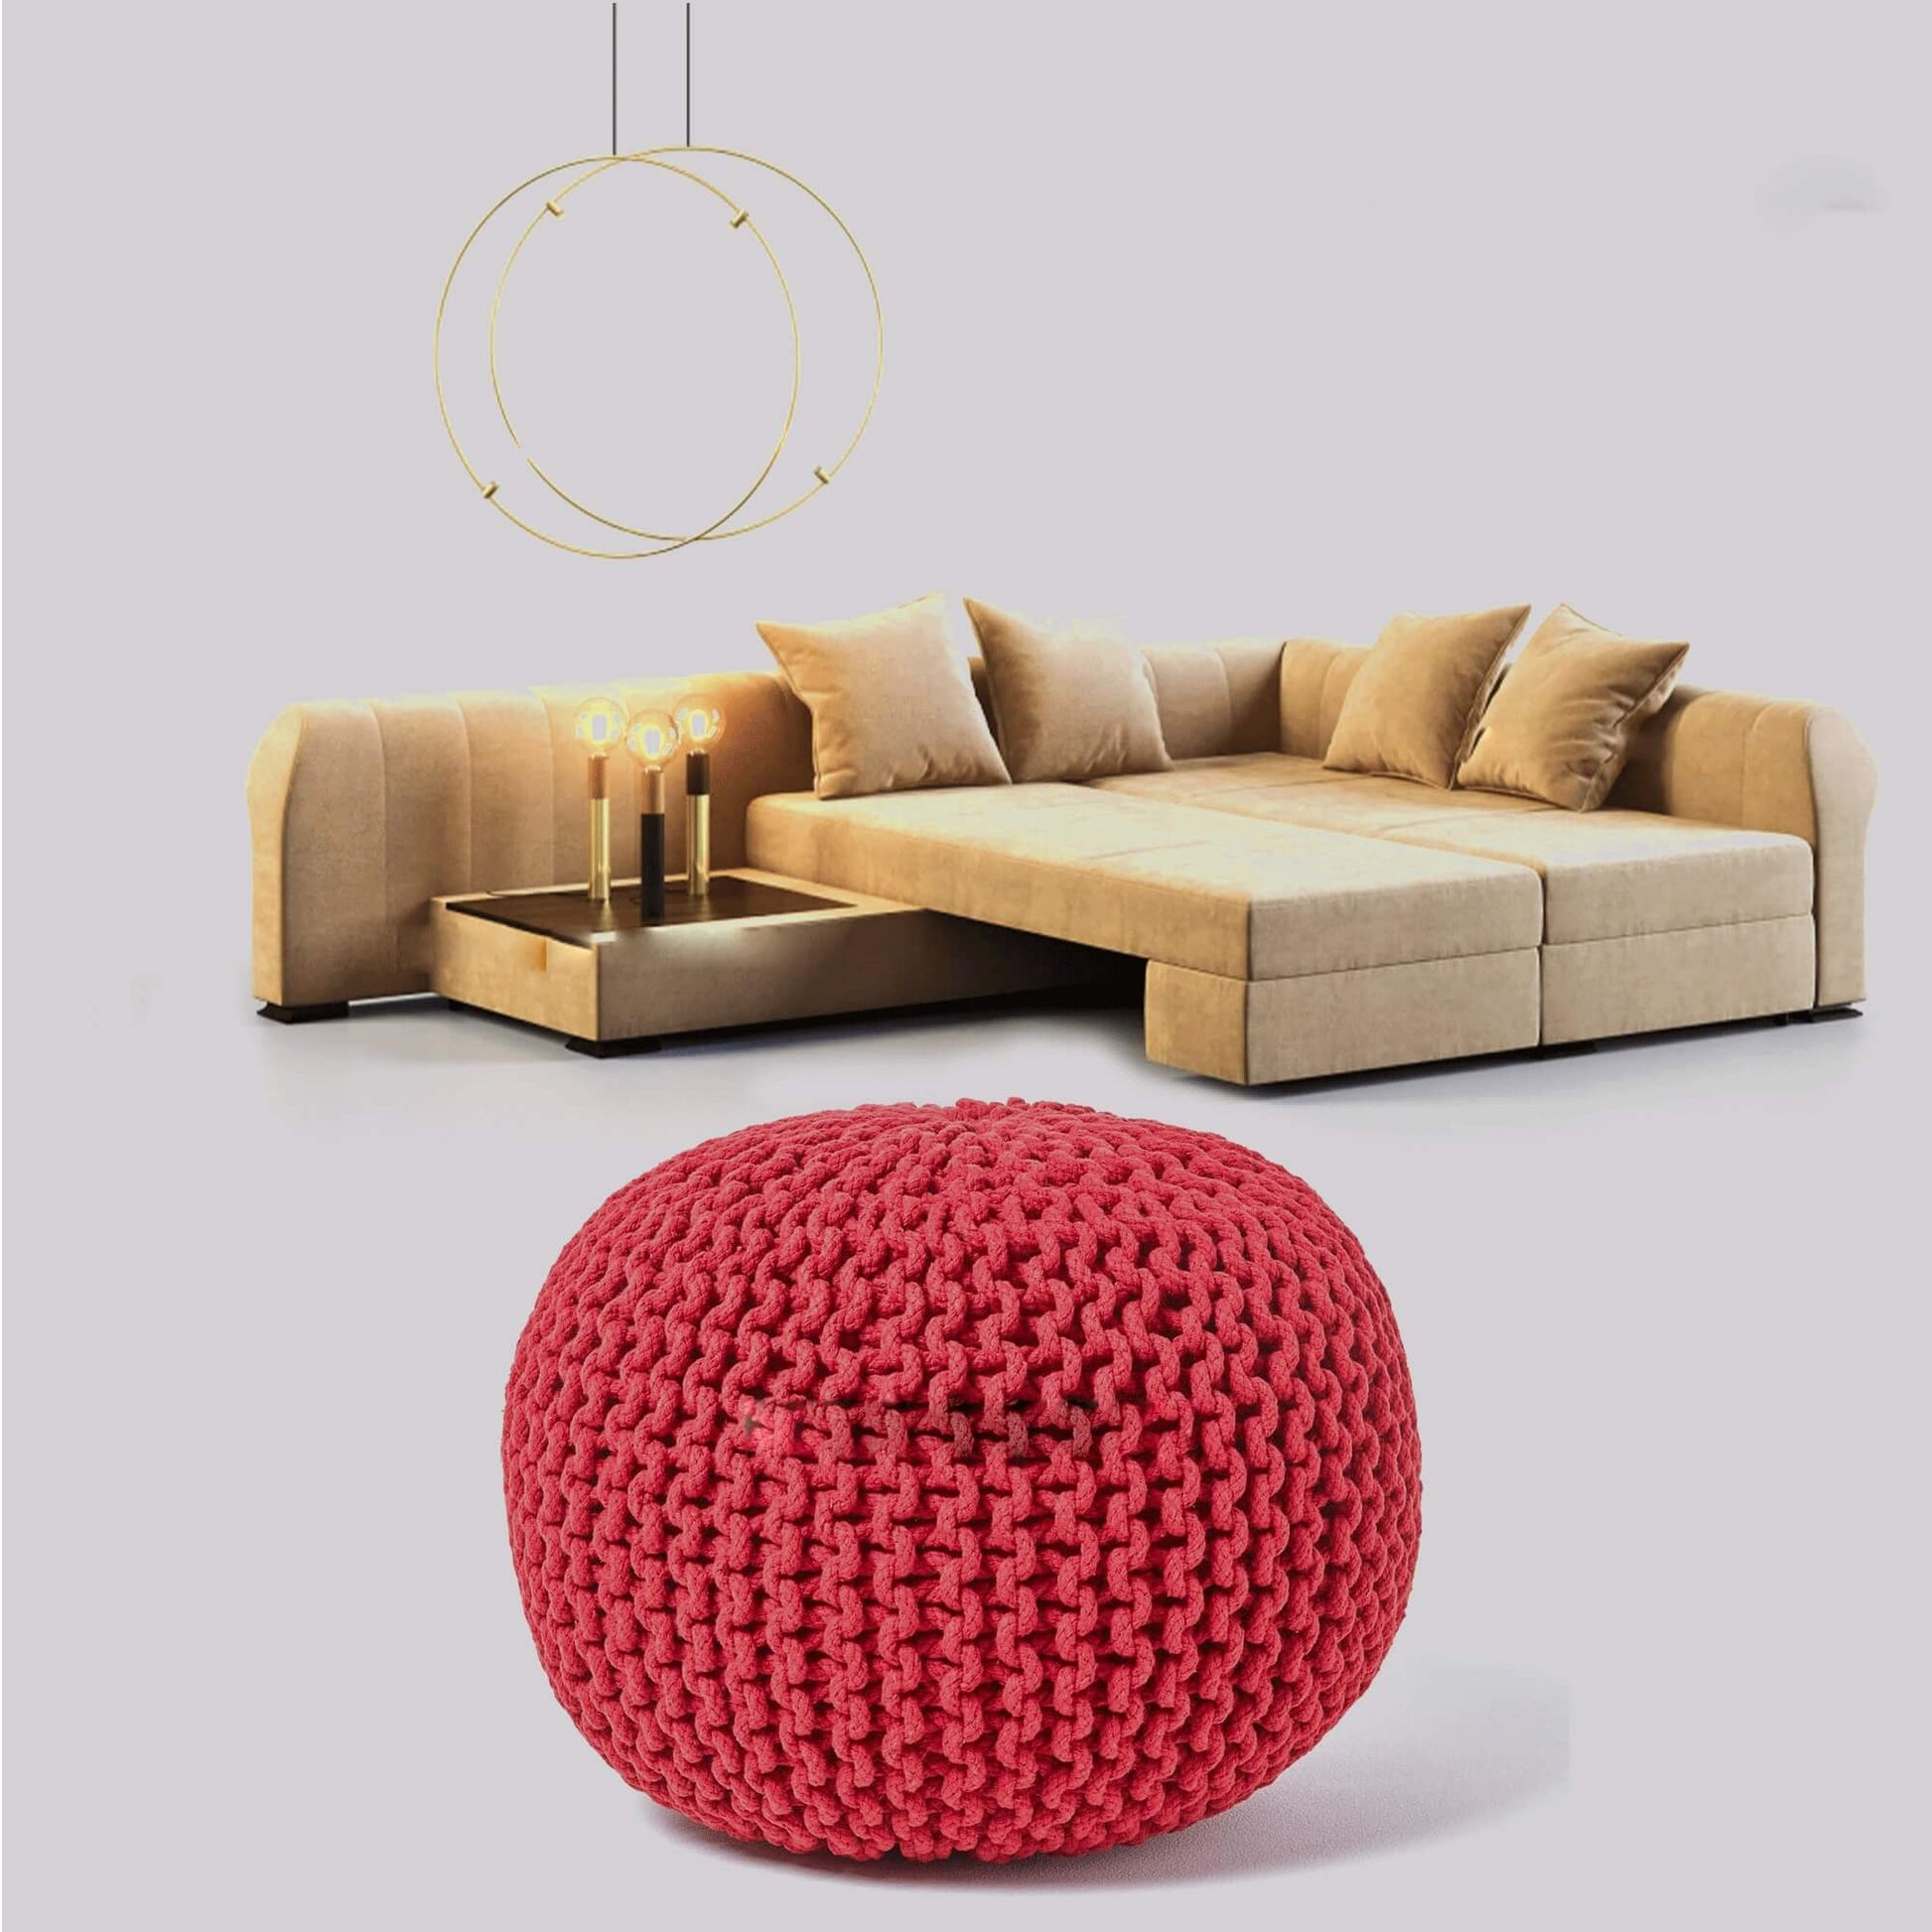 Knitted Pouffe & Footstool Round Large Moroccan Knitted 50CM - TheComfortshop.co.ukFurniture0721718971559thecomfortshopTheComfortshop.co.ukRed Knitted PoufRedKnitted Pouffe & Footstool Round Large Moroccan Knitted 50CM - TheComfortshop.co.uk